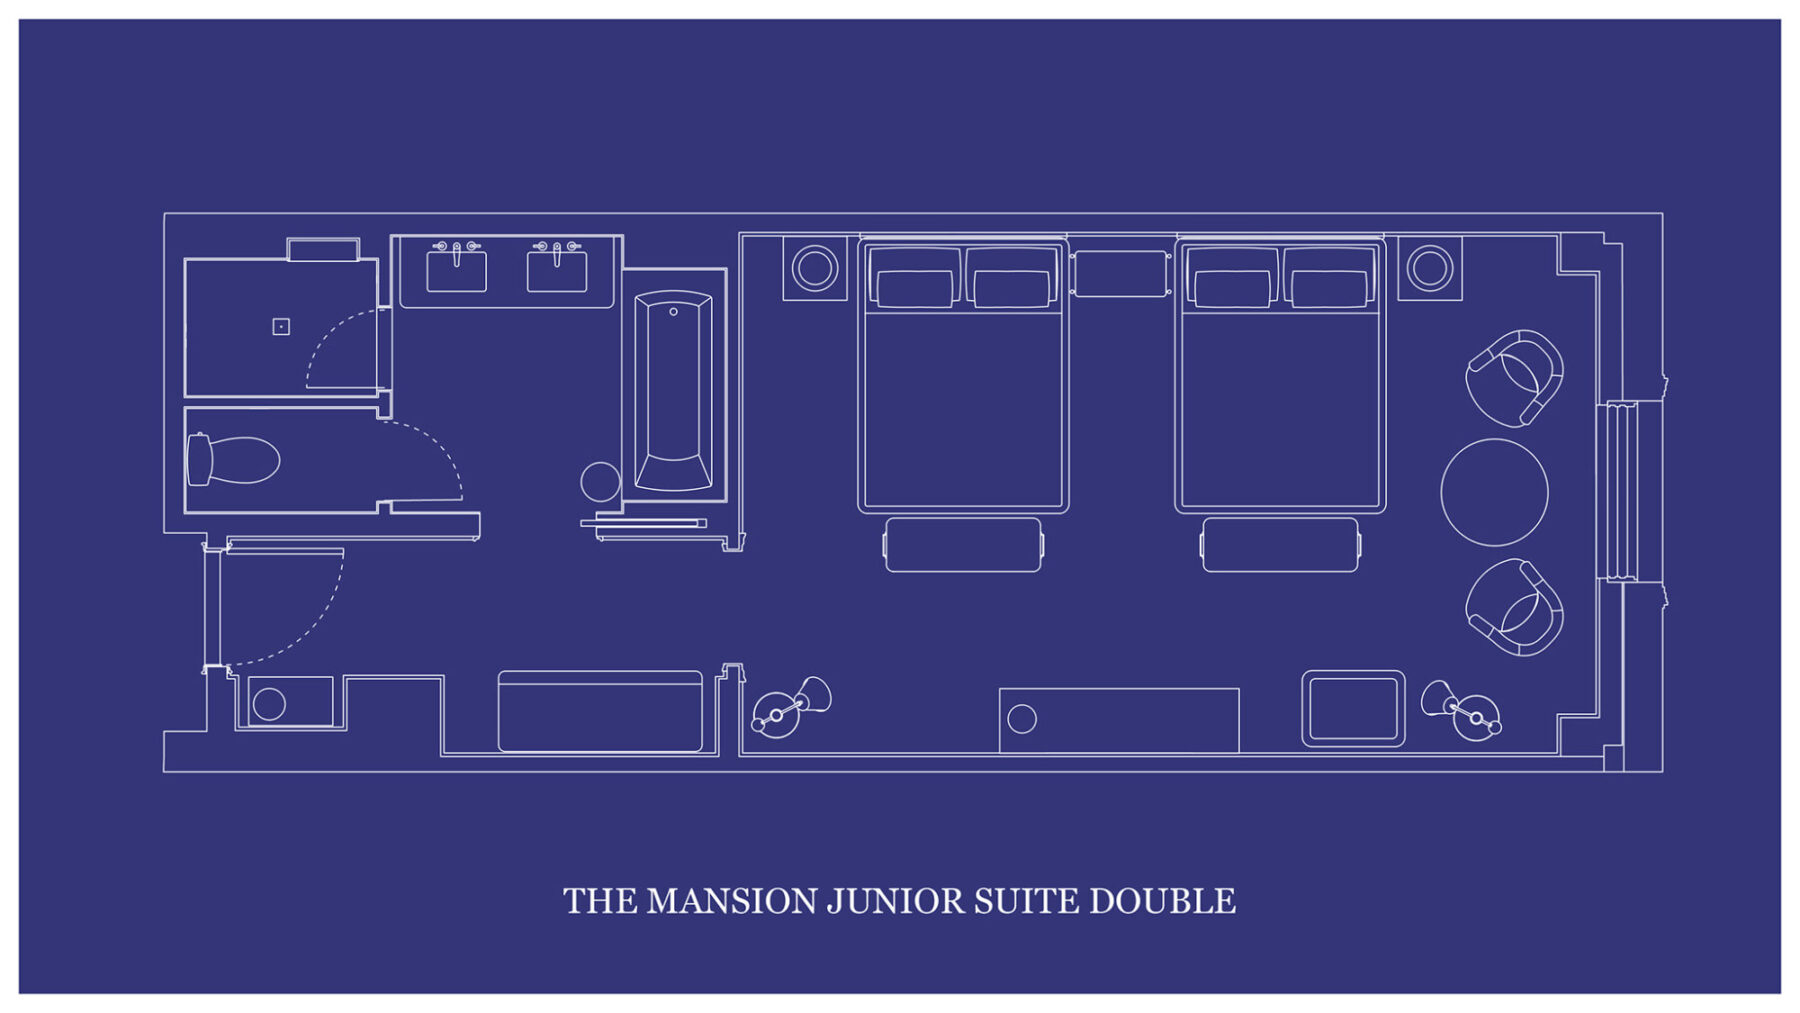 The architectural layout of "THE MANSION JUNIOR SUITE DOUBLE" is depicted on a blueprint map.